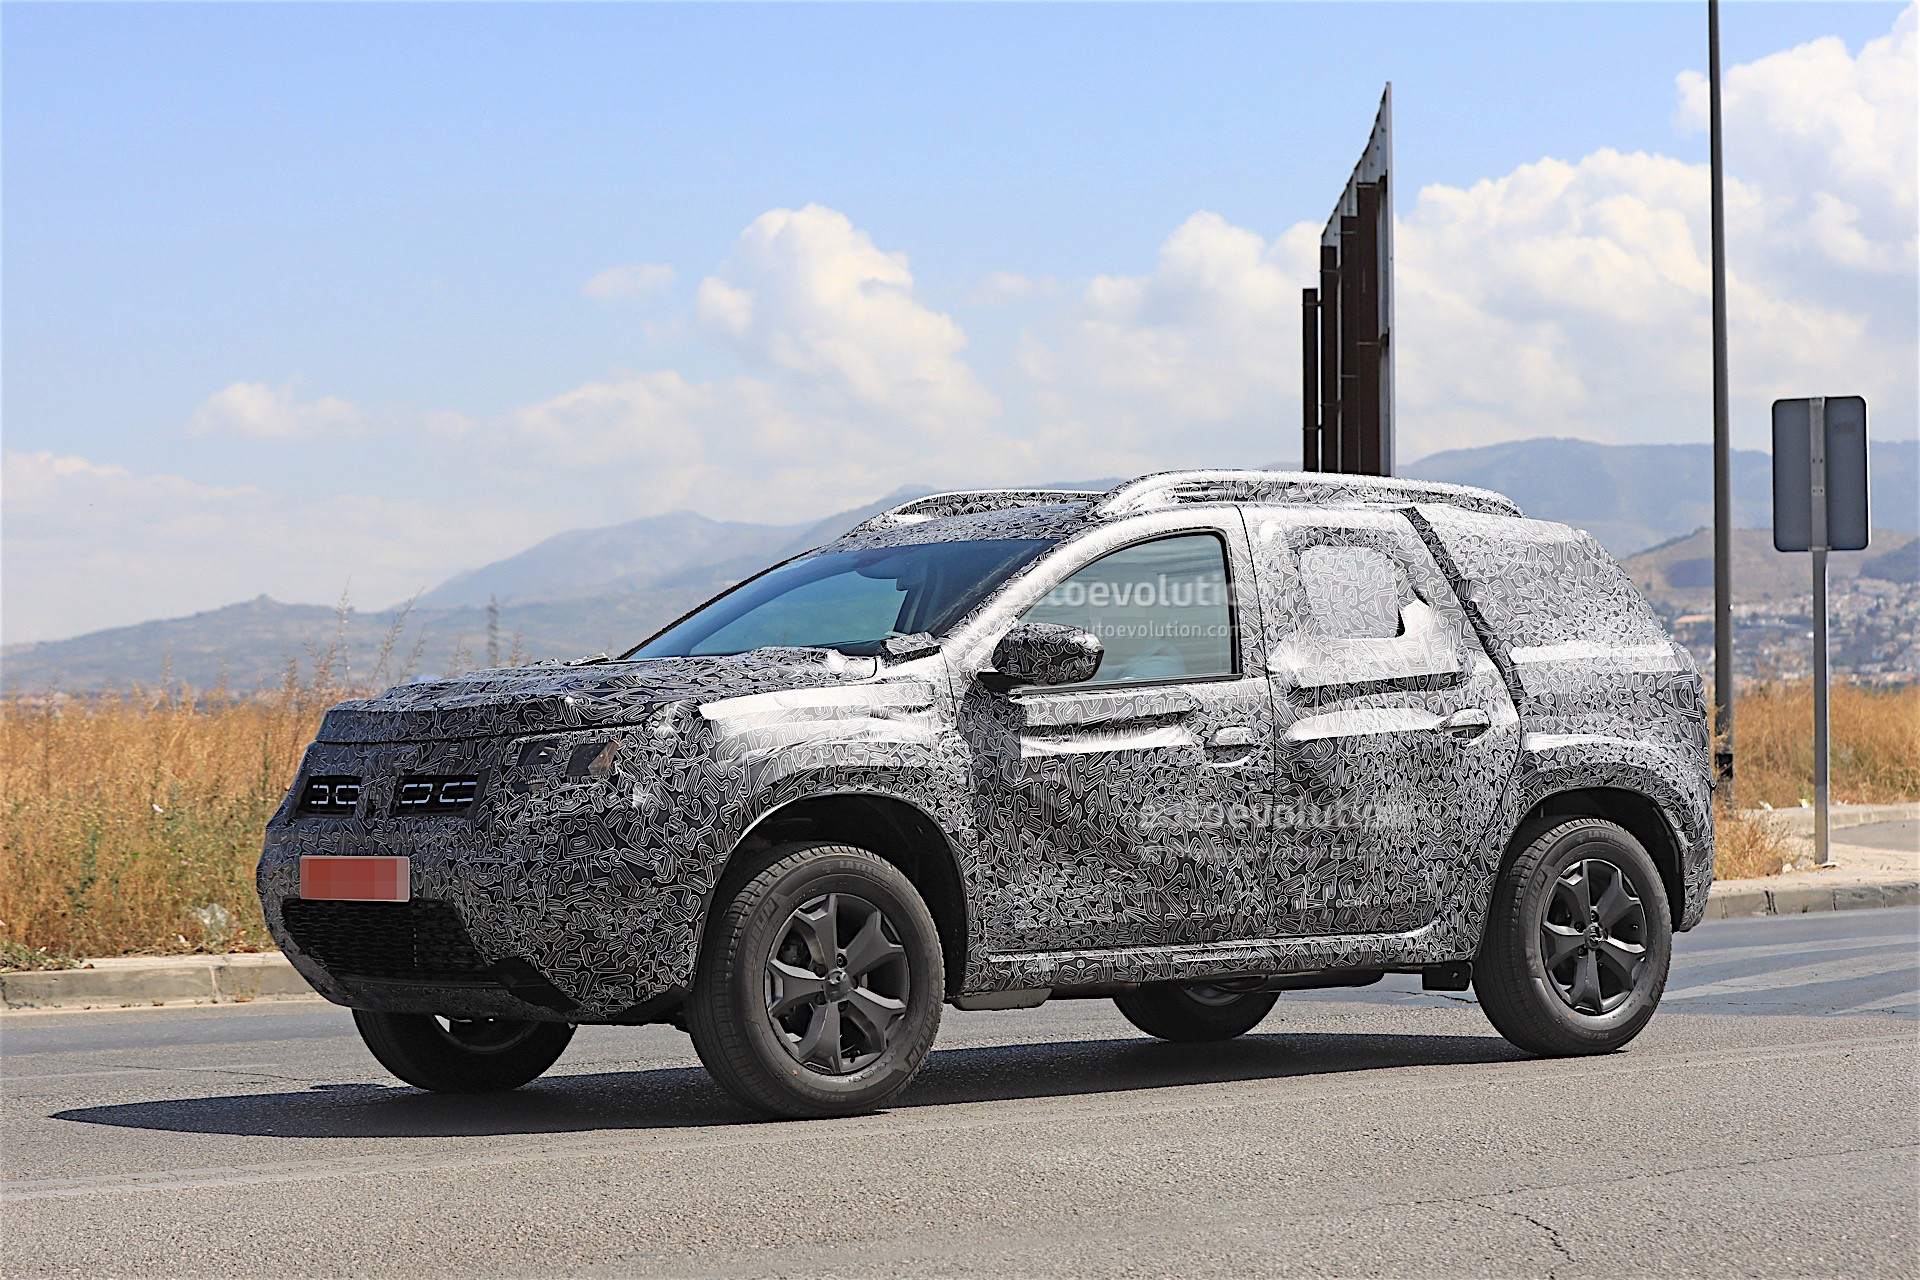 2019 Dacia Duster Spied For the First Time, Prototype Looks